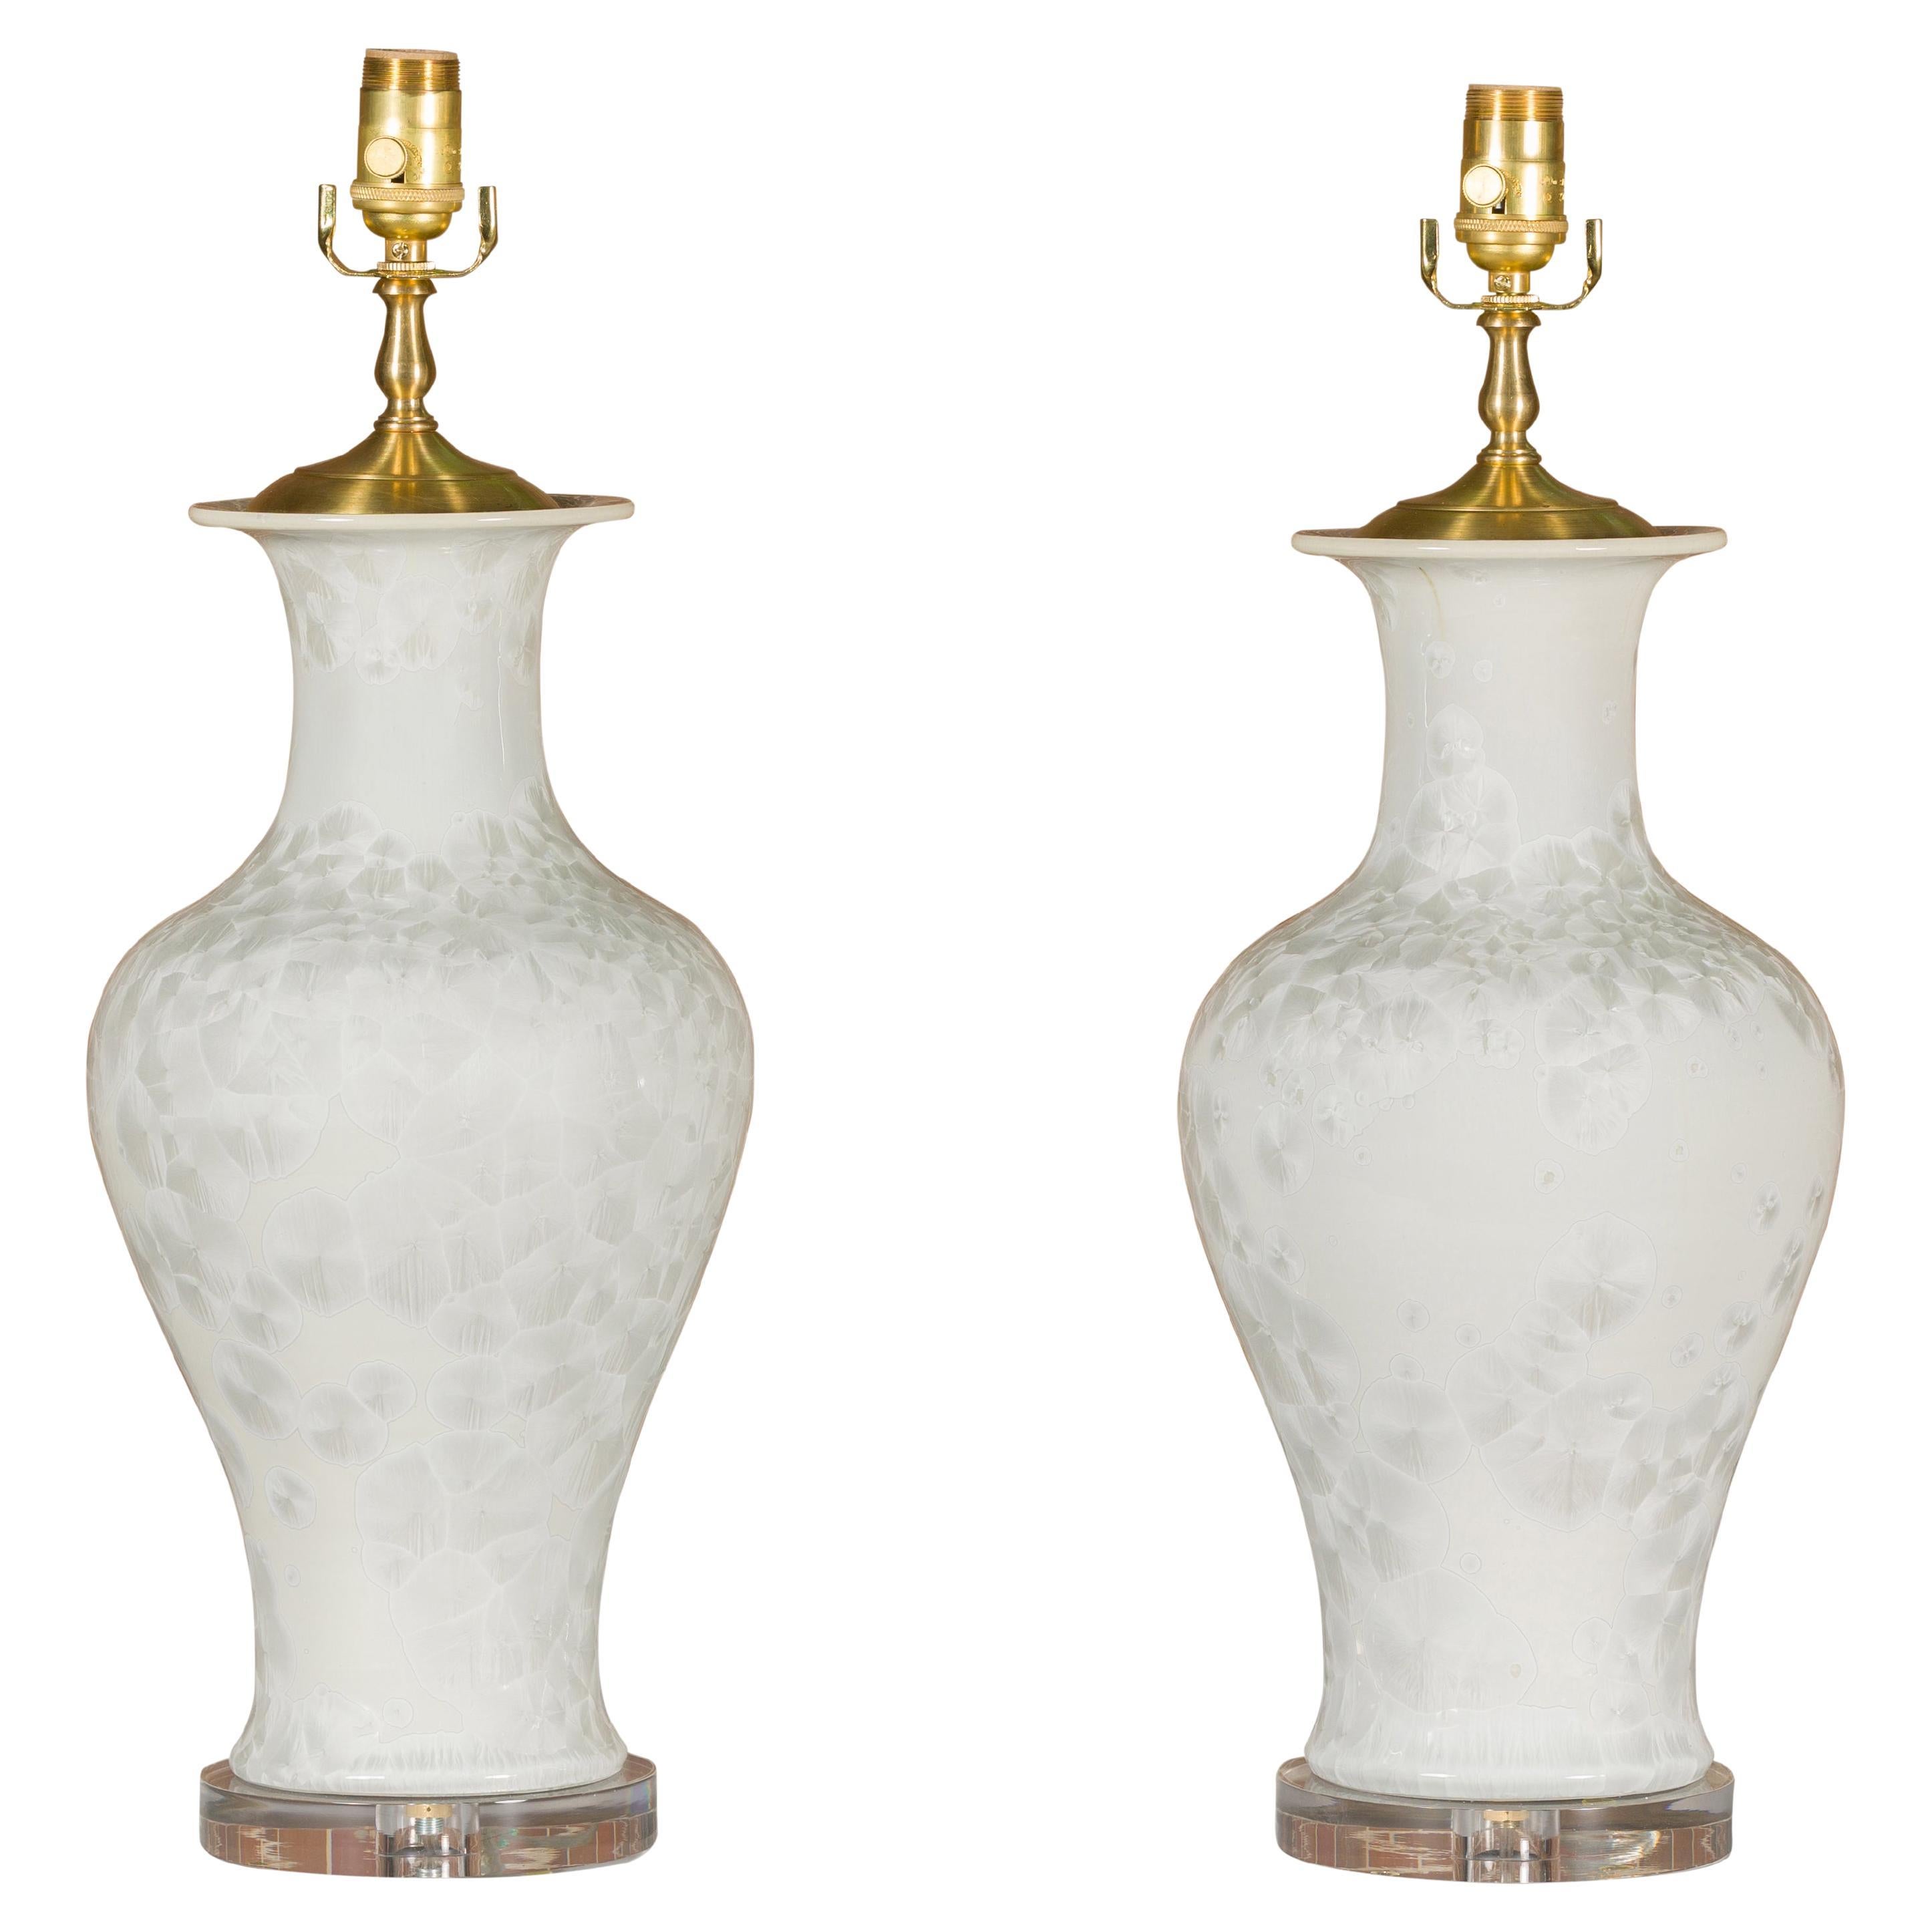 Pair of White Porcelain Vase Table Lamps on Lucite Bases with Textured Décor